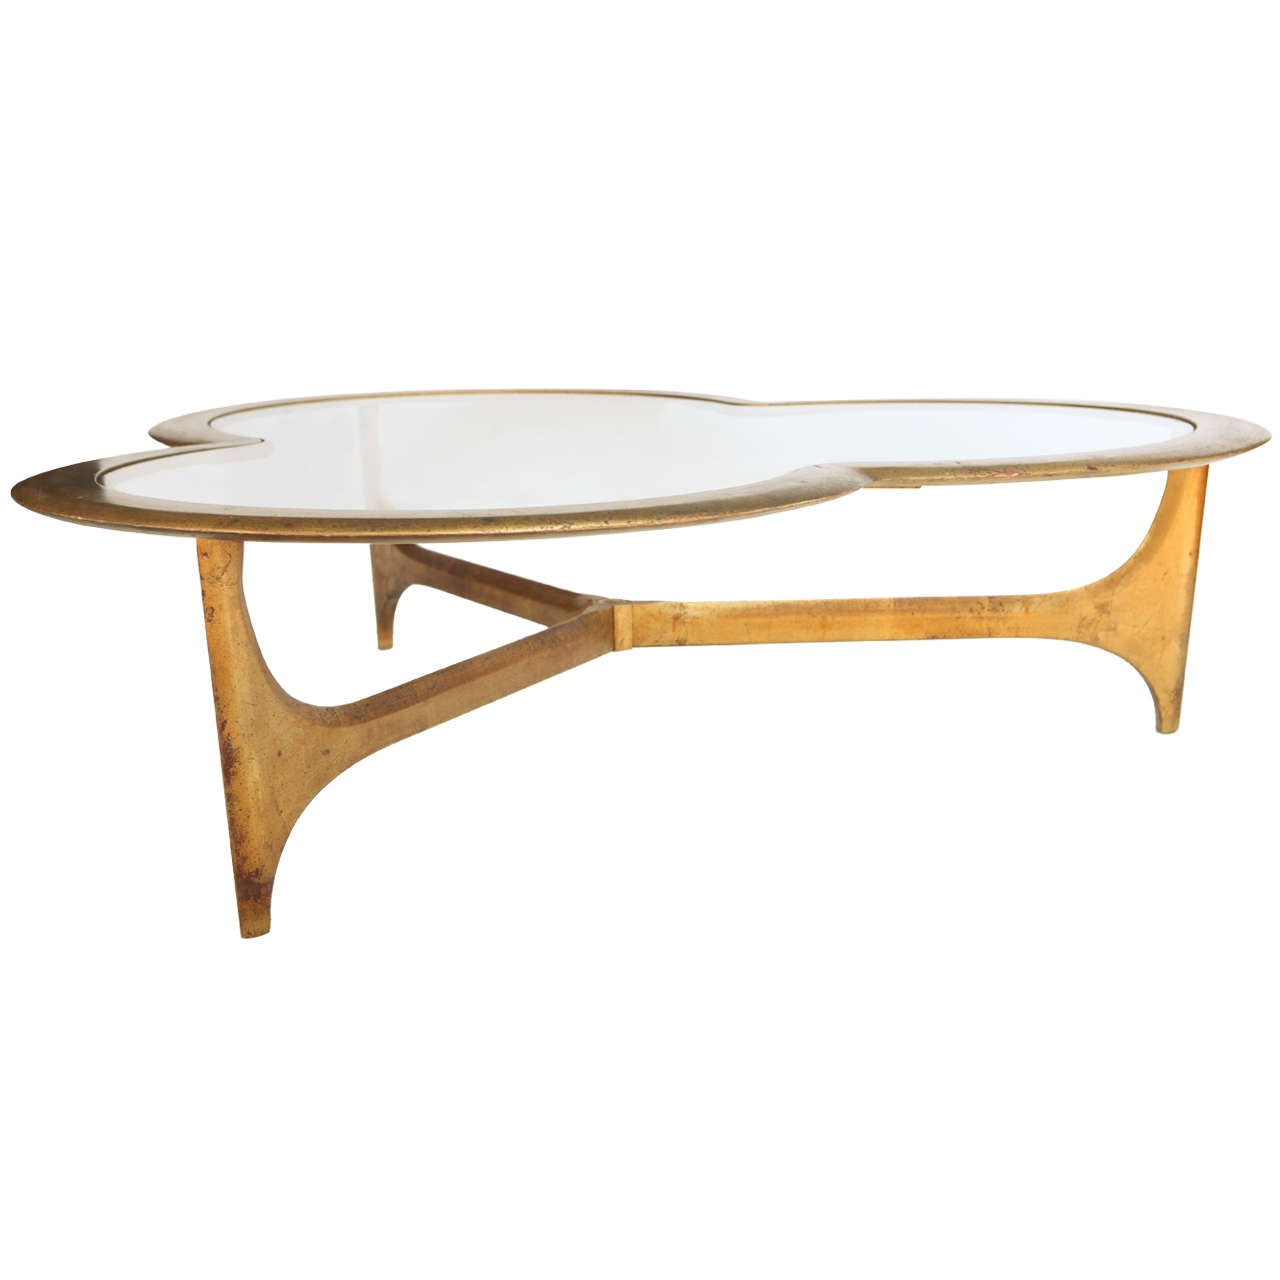 Gold Leaf and Glass Trefoil Coffee Table